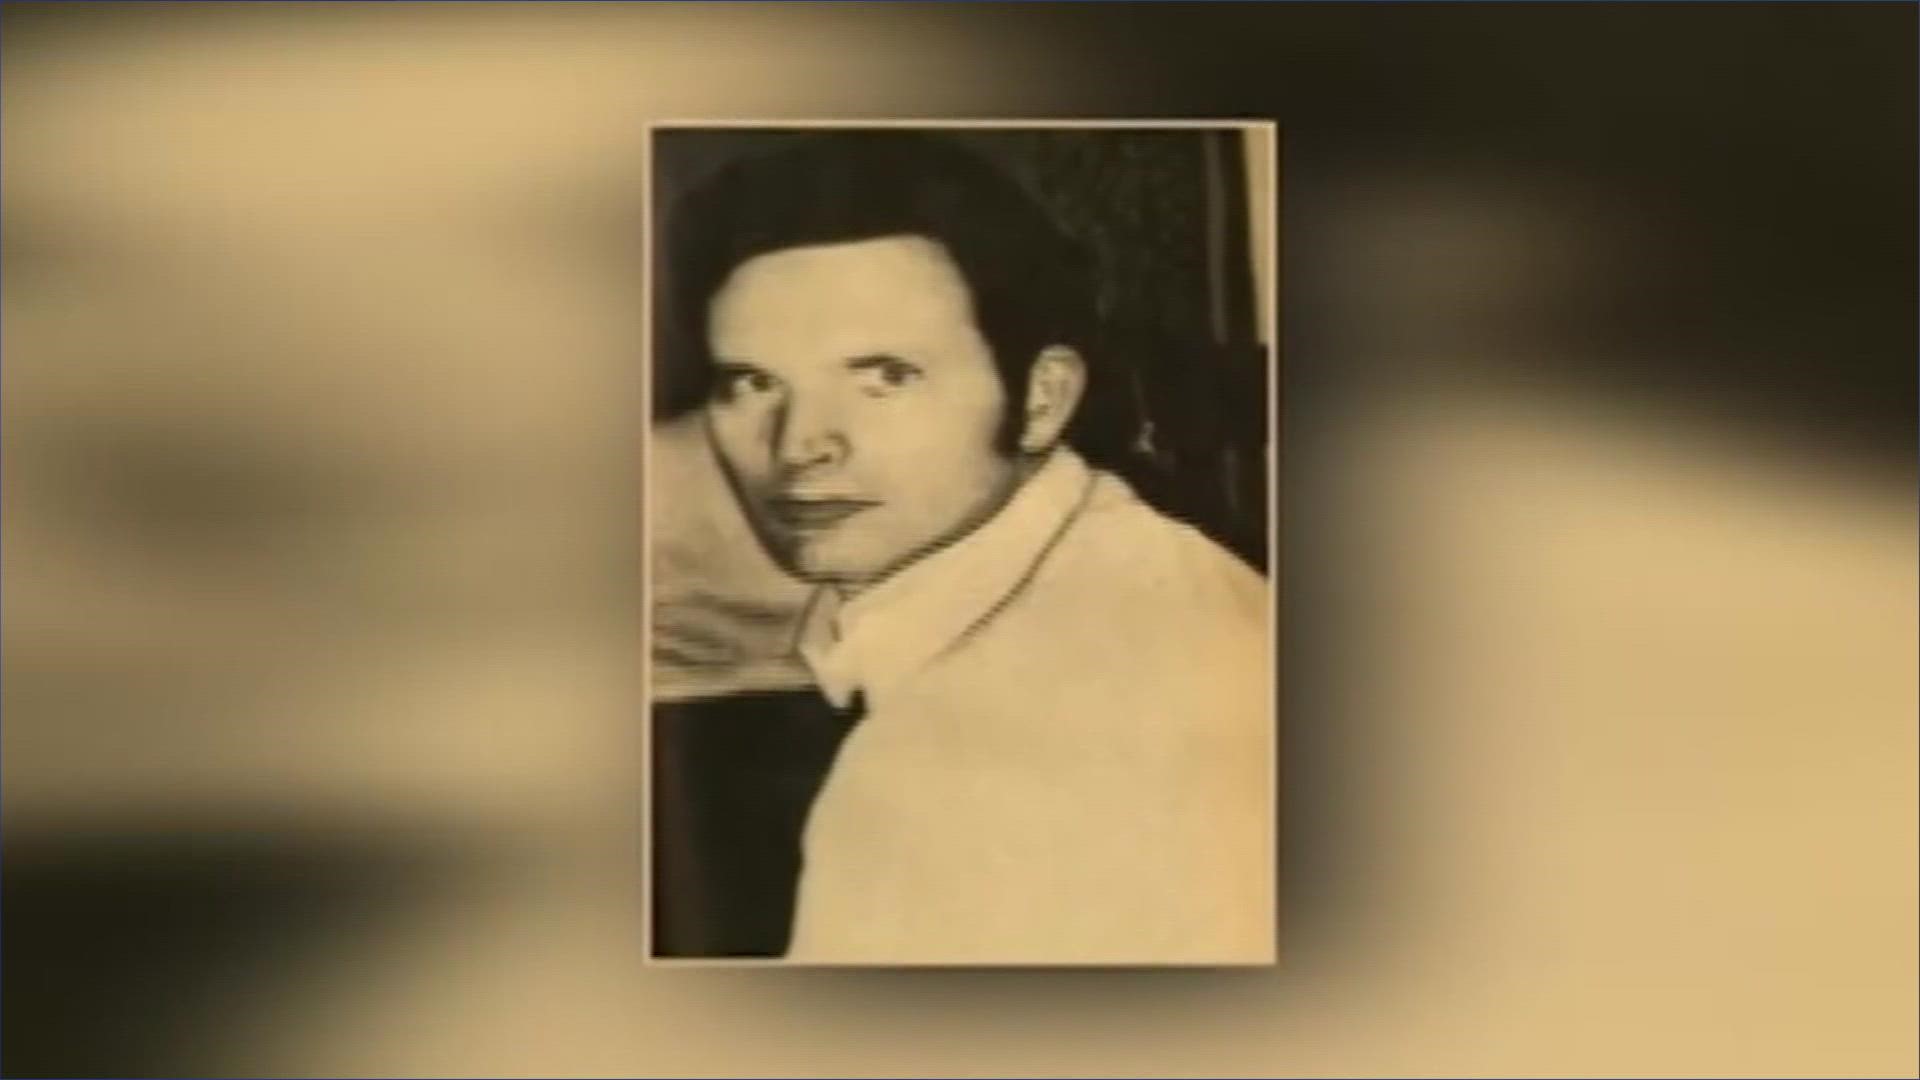 Texas Equusearch plans to start searching for remains of serial killer Dean Corll's victims and said they believe as many as 20 could be found.